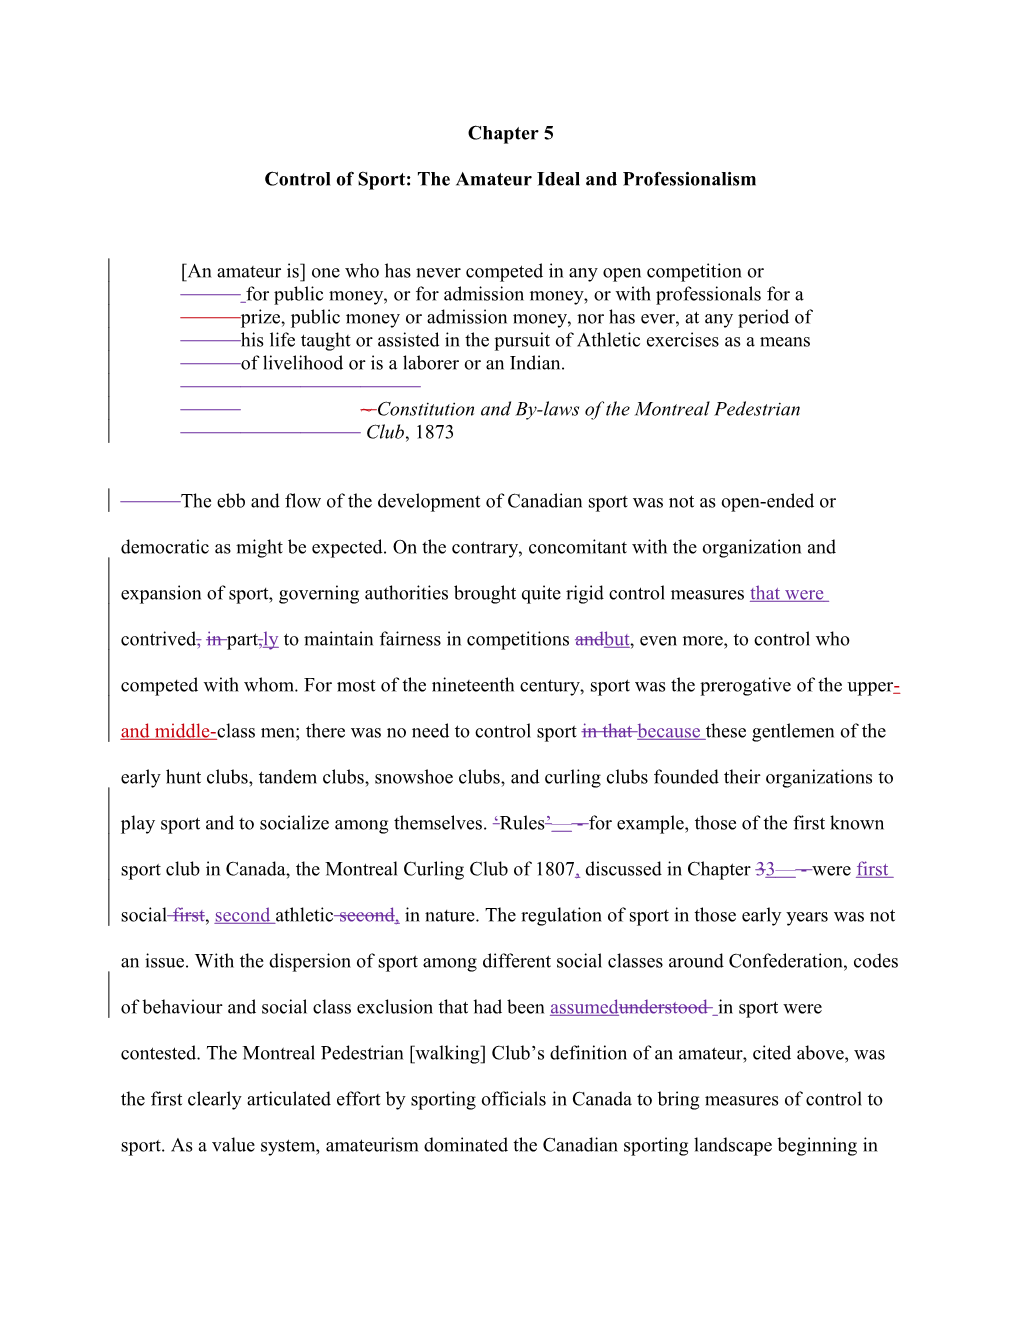 Control of Sport: the Amateur Ideal and Professionalism